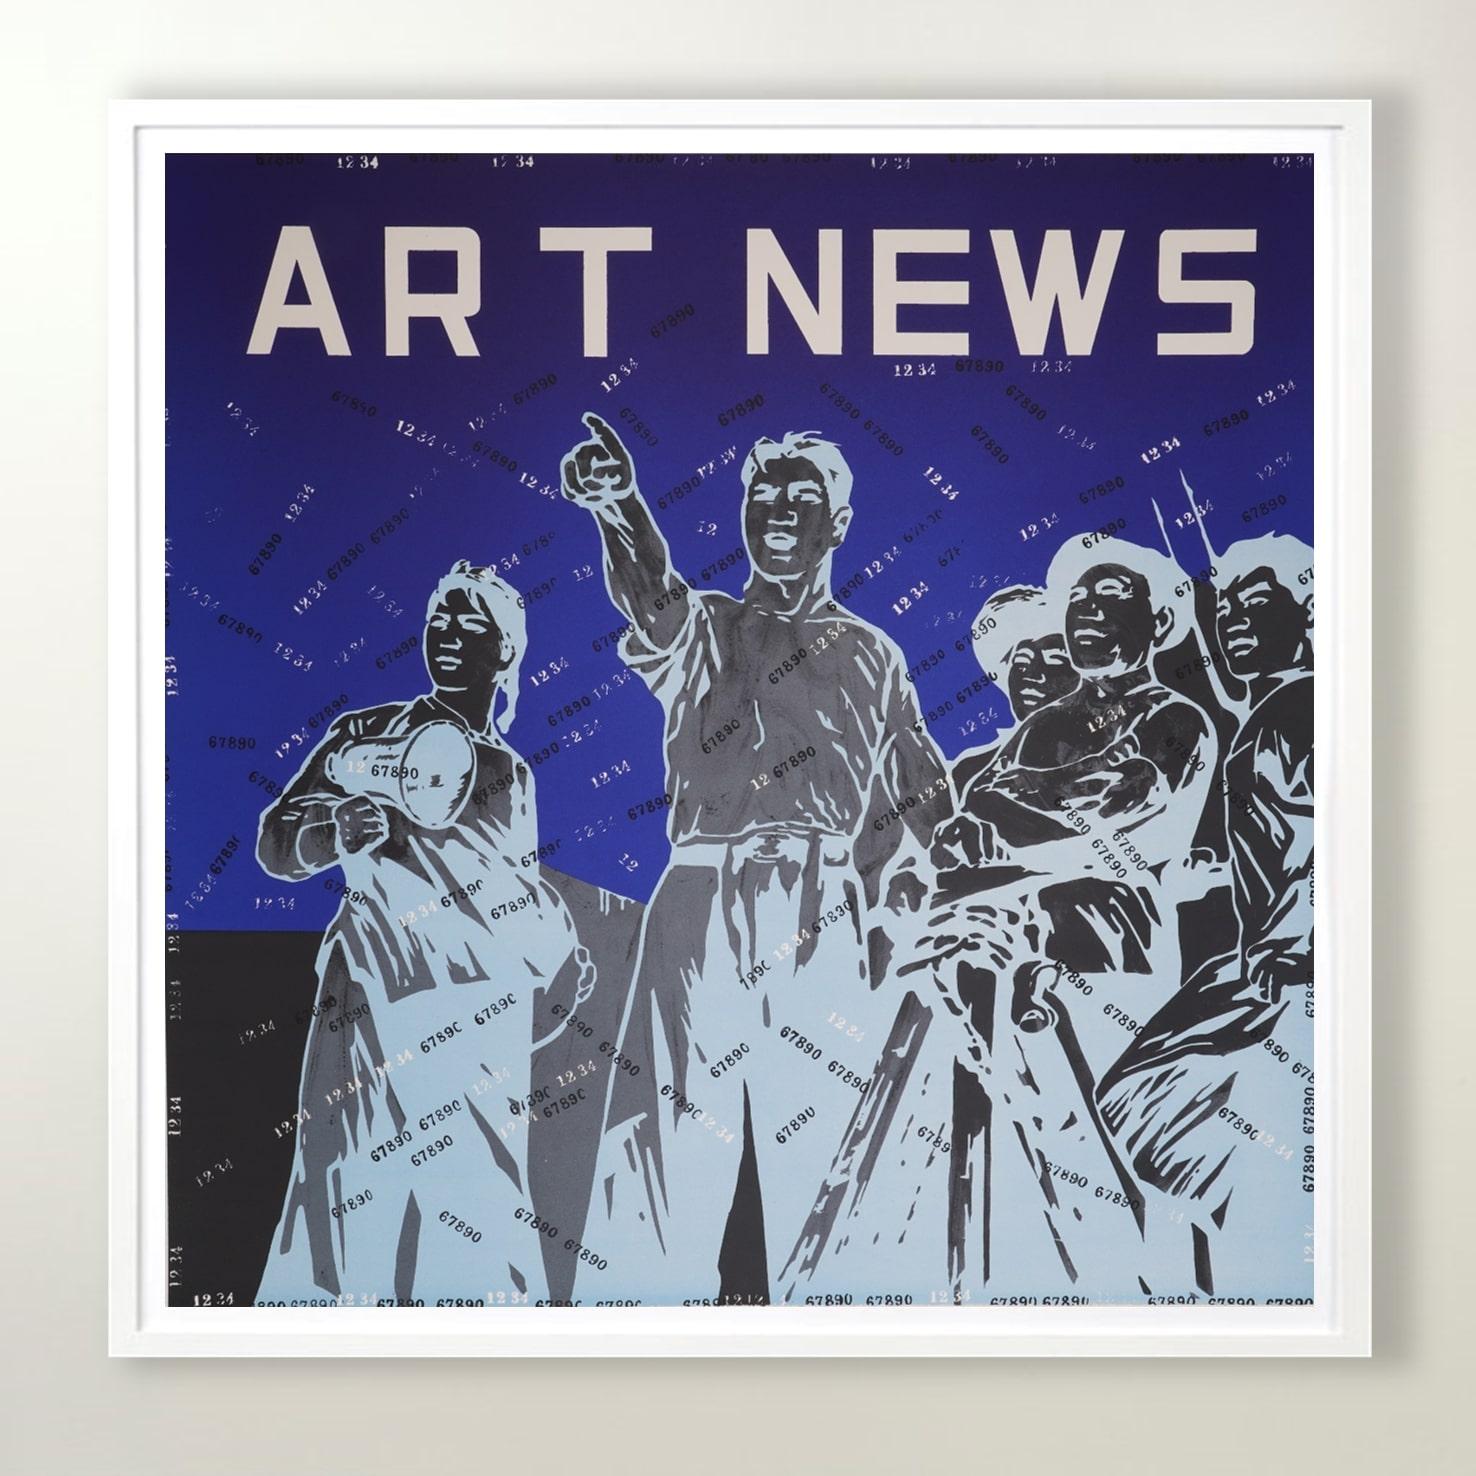 Wang Guangyi, Art News
Contemporary, 21st Century, Lithograph, Chinese art, Limited Edition
Lithograph accompanied by poem by Fernando Arrabal
120 x 80 cm (47.2 x 31.5 in.)
Signed and numbered, accompanied by Certificate of Authenticity
In mint